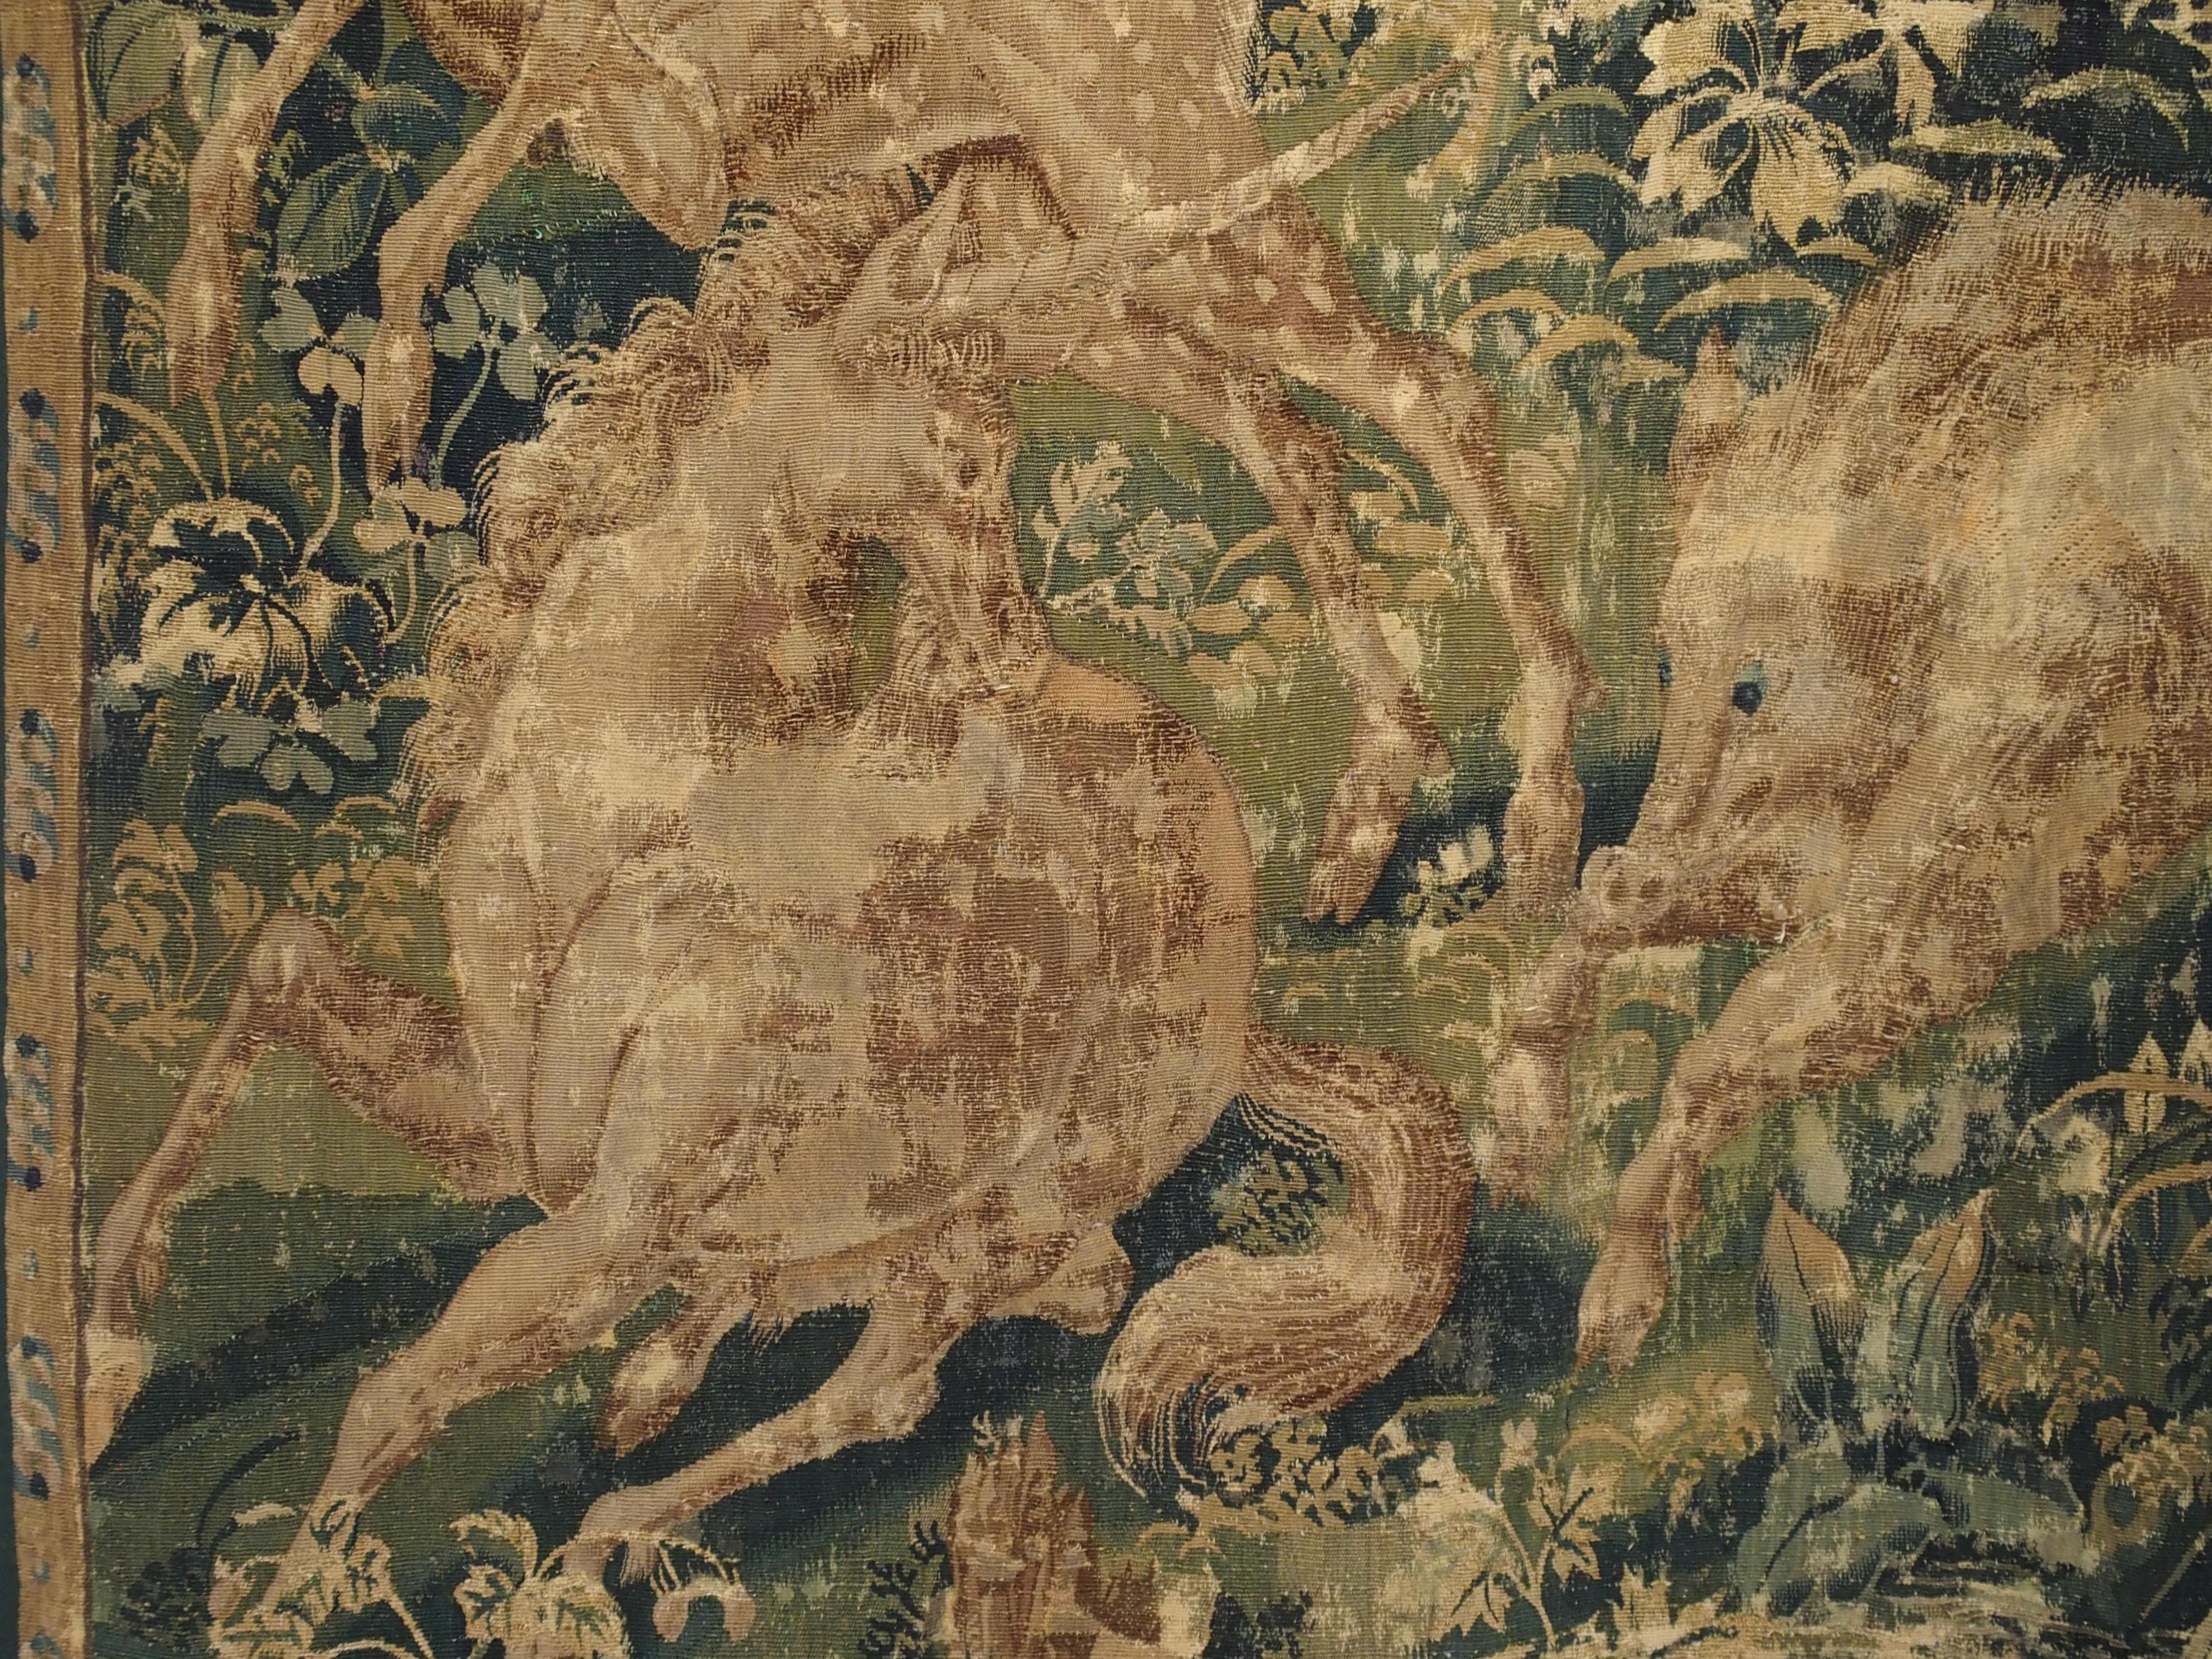 This magnificent tapestry was woven in Flanders during the middle of the European Renaissance, in the late 1500s. At this time, Flanders was creating some of the best textiles in the world, and many of the rich wooded scenes with animals and hunting